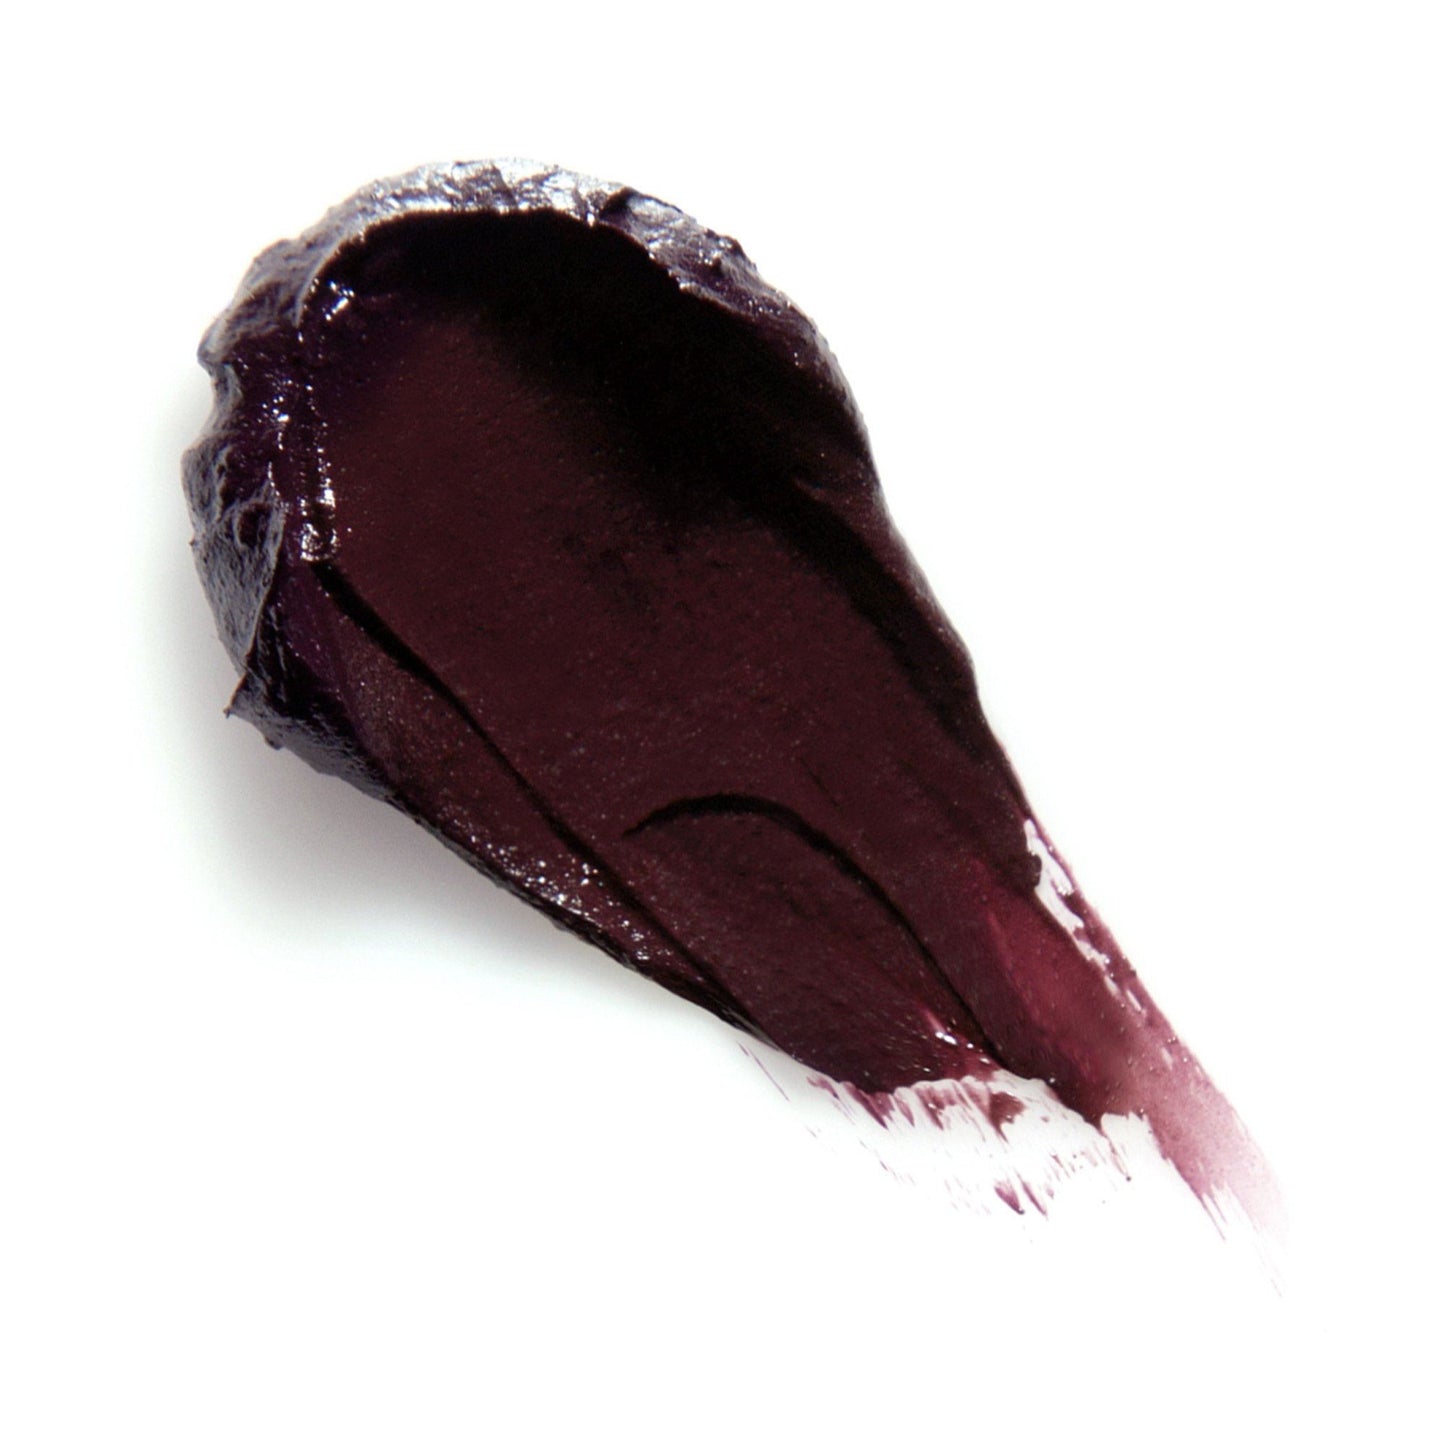 Moonseed (ripened blackberry stain)